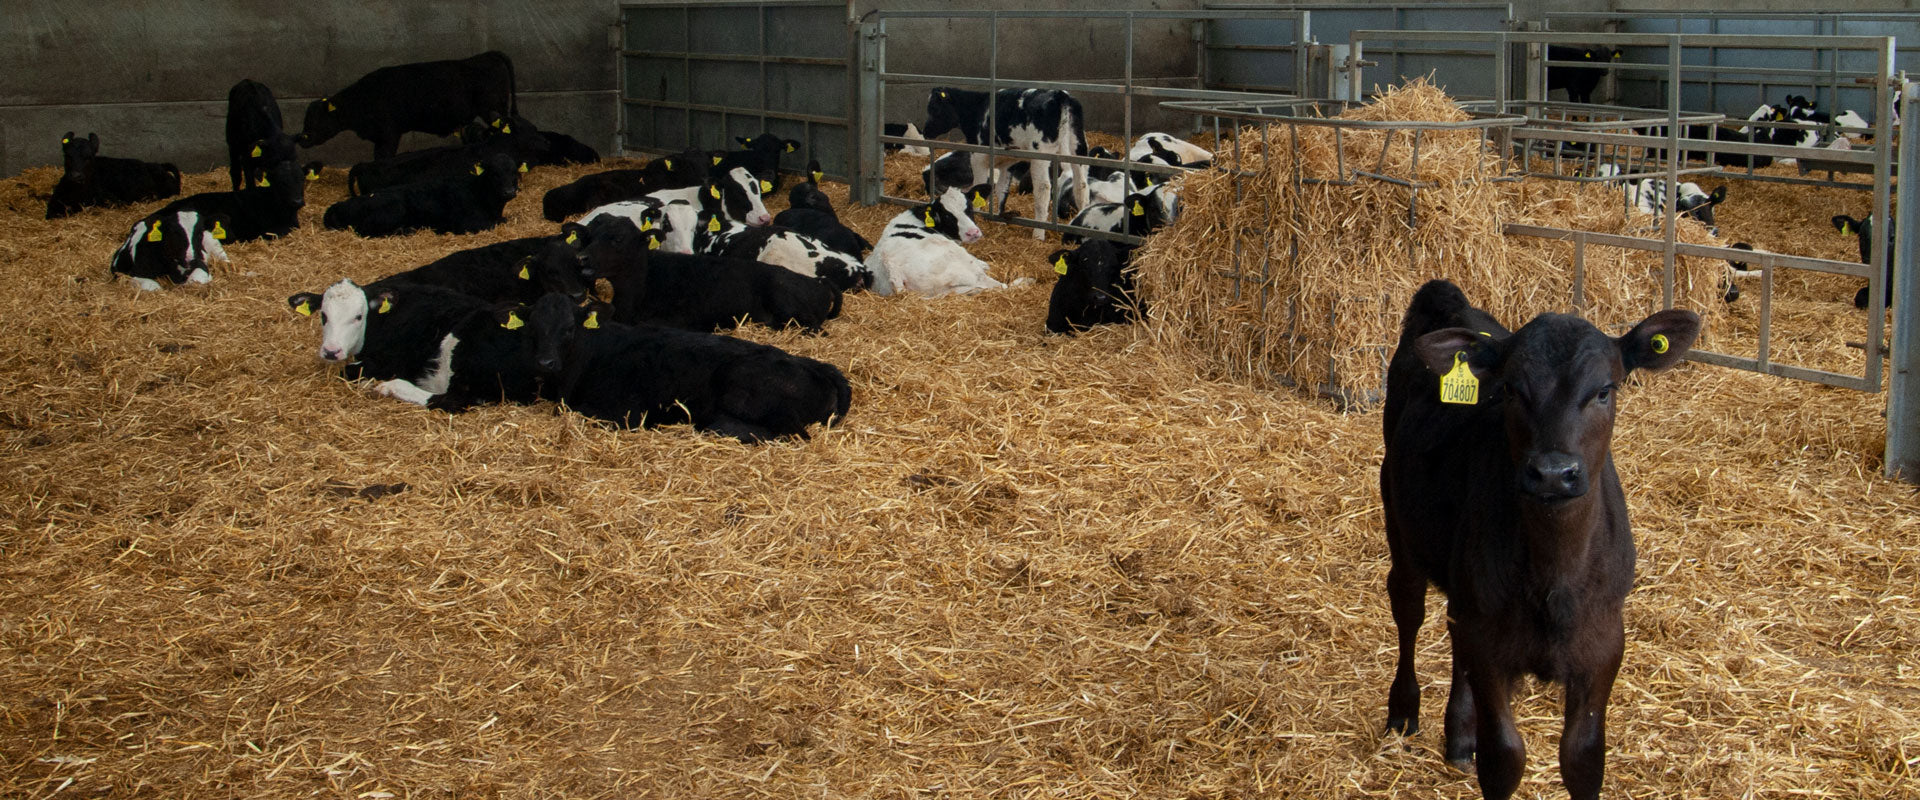 Photo of some cows and calves in a barn environment; there's a calf looking directly at the camera